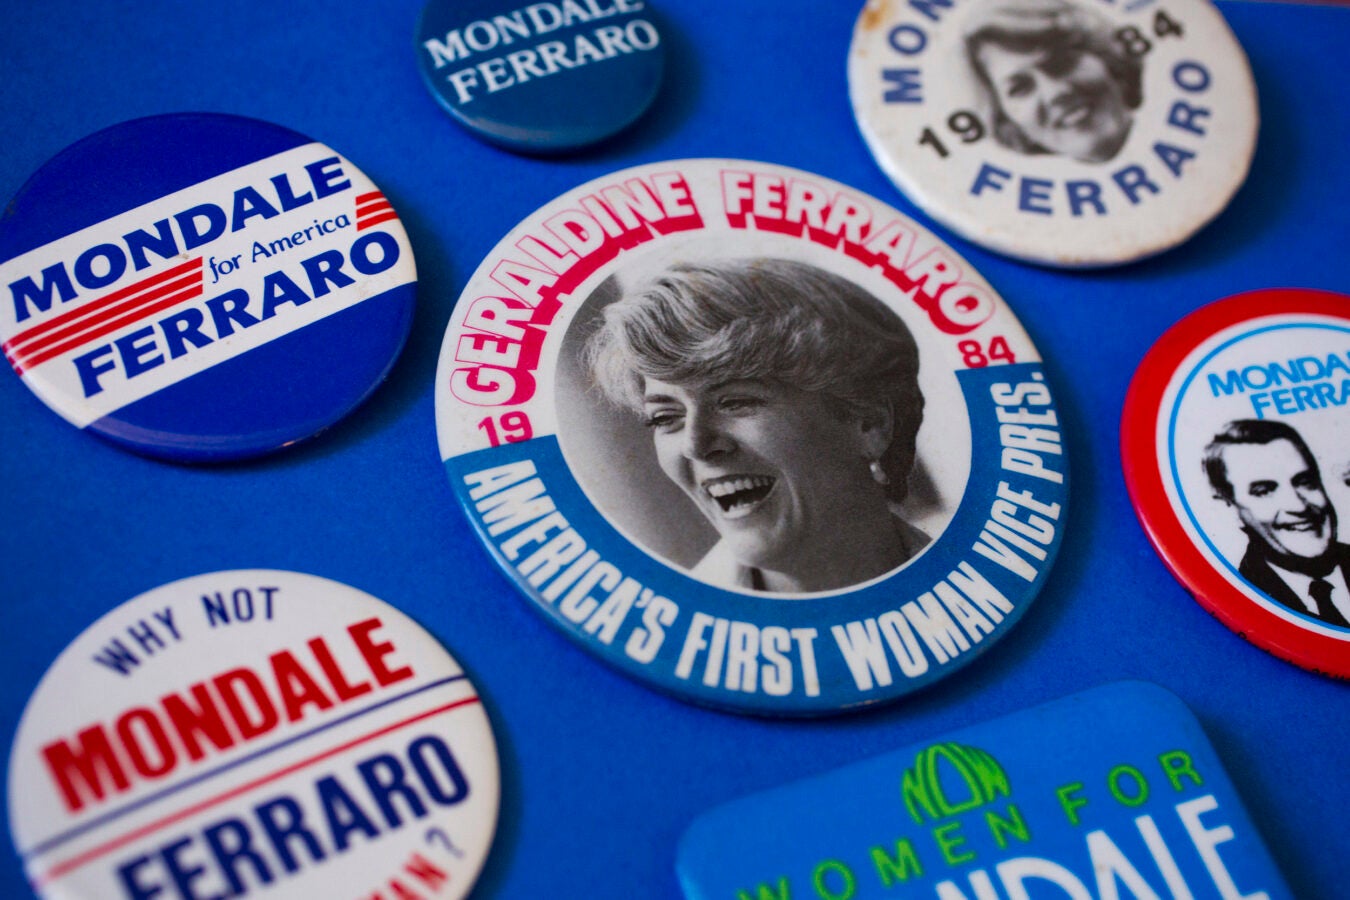 In 1984, Geraldine Ferraro was the first female vice presidential candidate from a major political party in the United States.